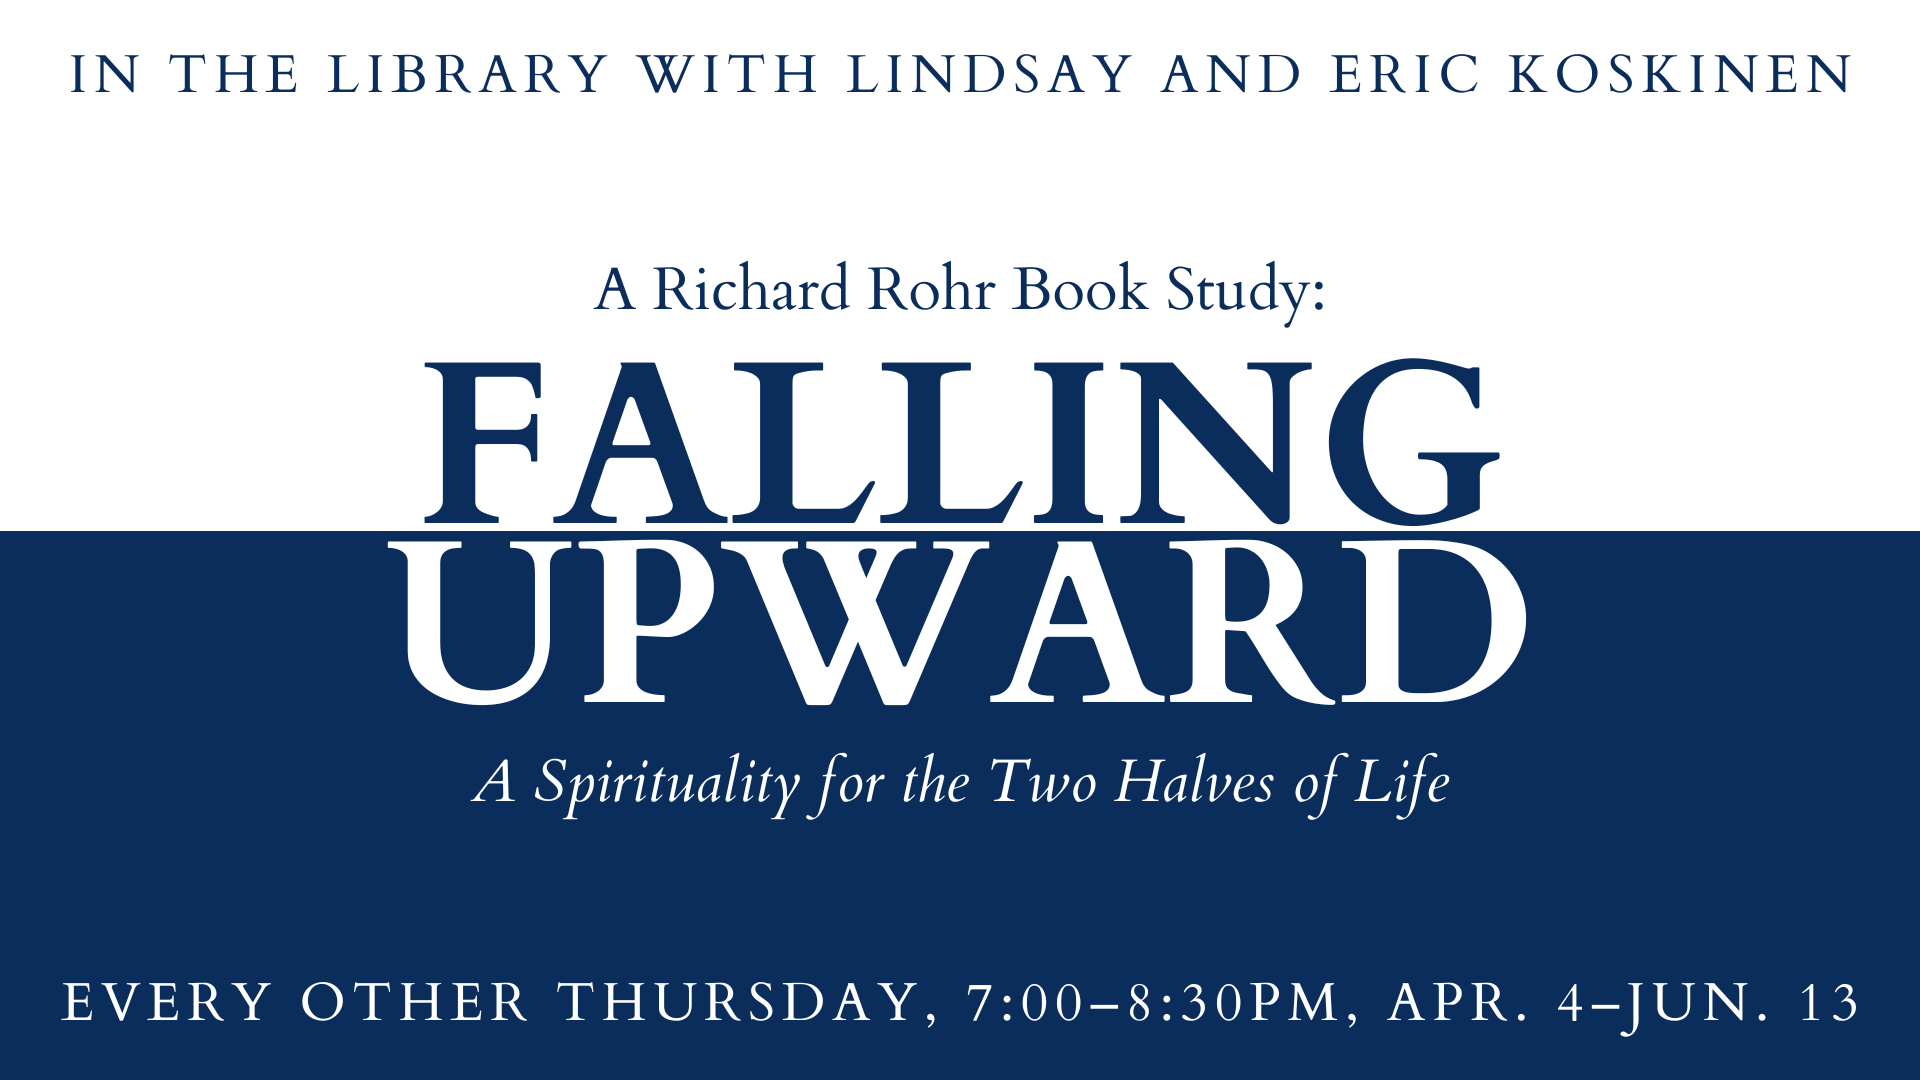 Book Study FALLING UPWARD A Spirituality for the Two Halves of Life By Richard Rohr (1)